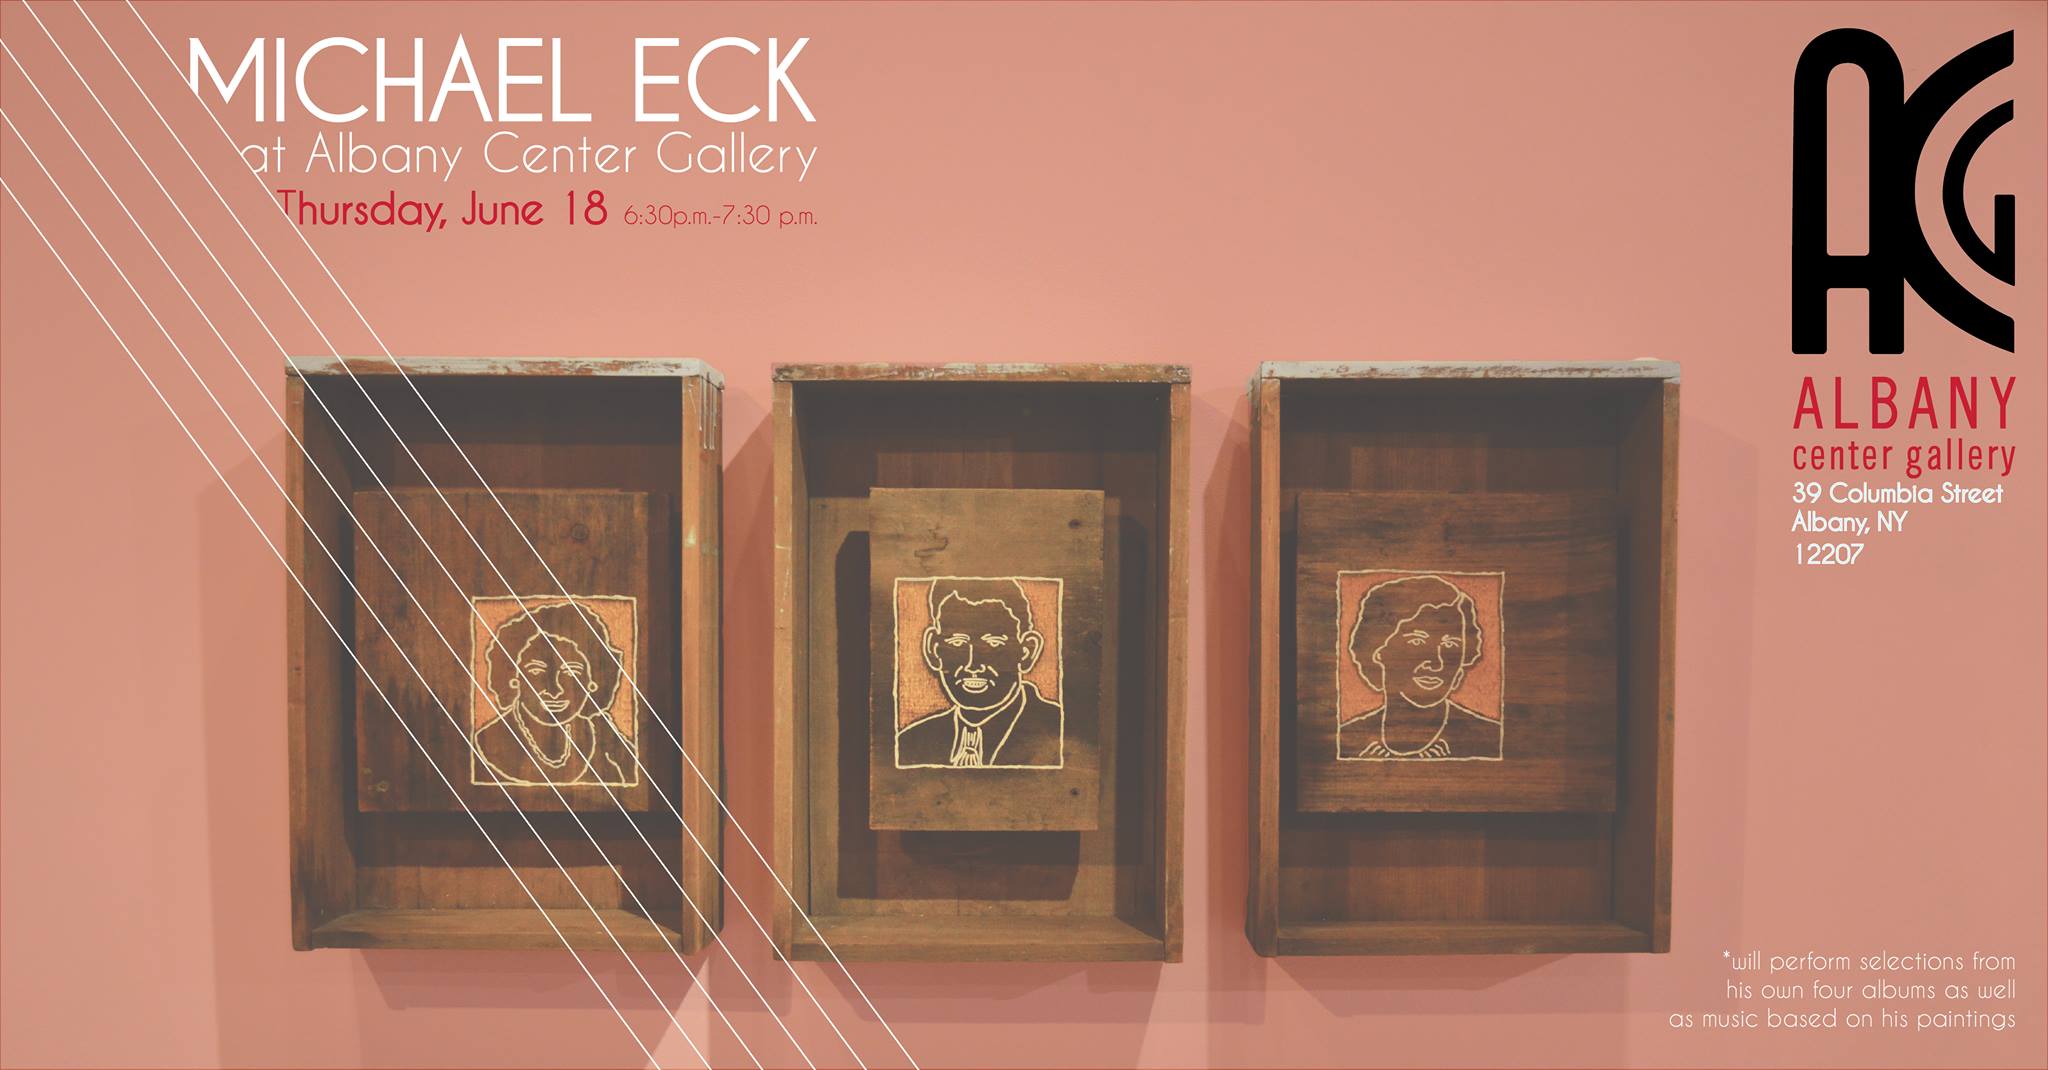 Michael Eck at Albany Center Gallery